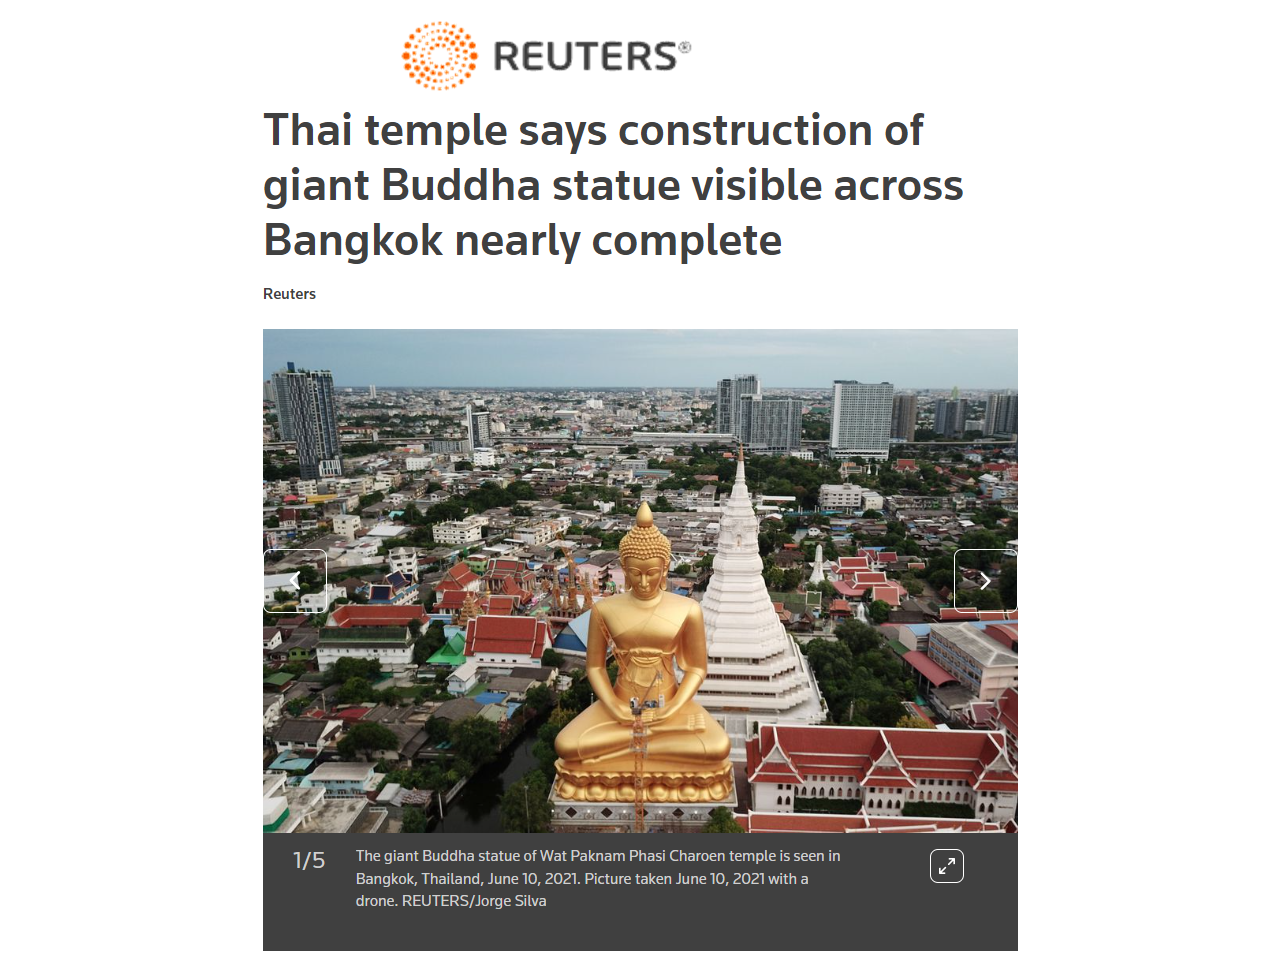 Thai temple says construction of giant Buddha statue visible across Bangkok nearly complete